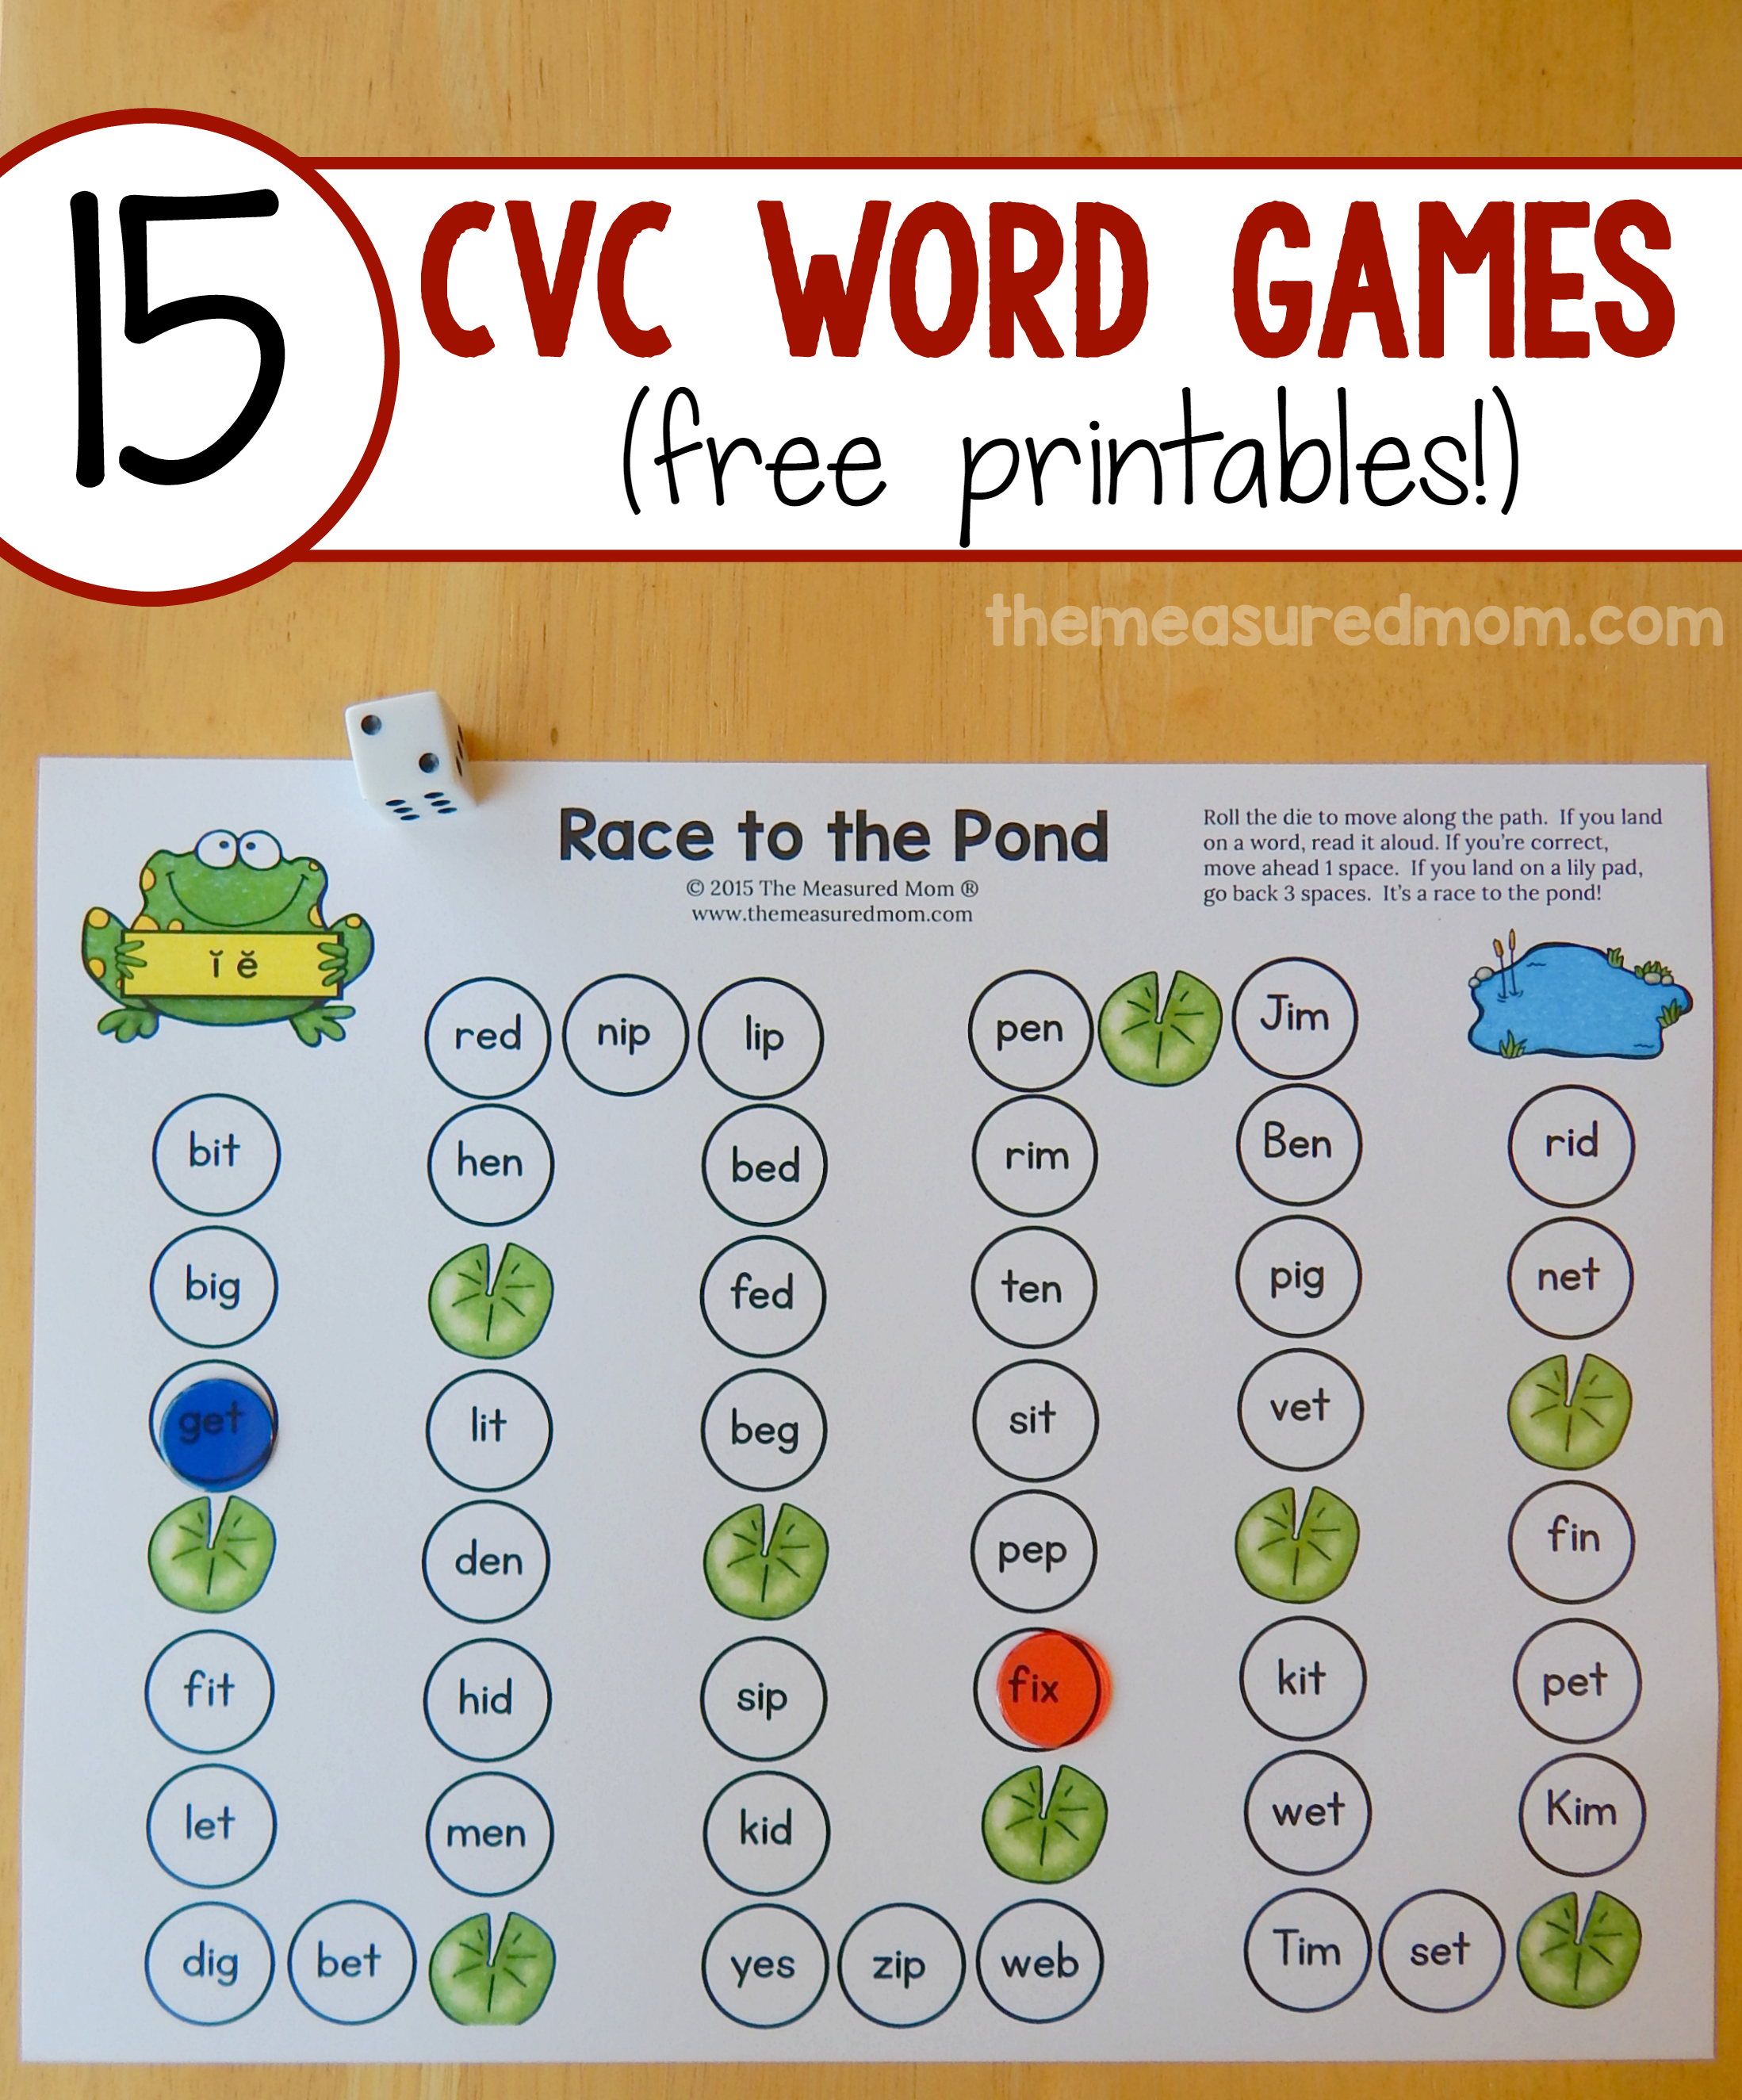 Teach Cvc Words With 15 Free Games! - The Measured Mom - Free Printable Word Family Games